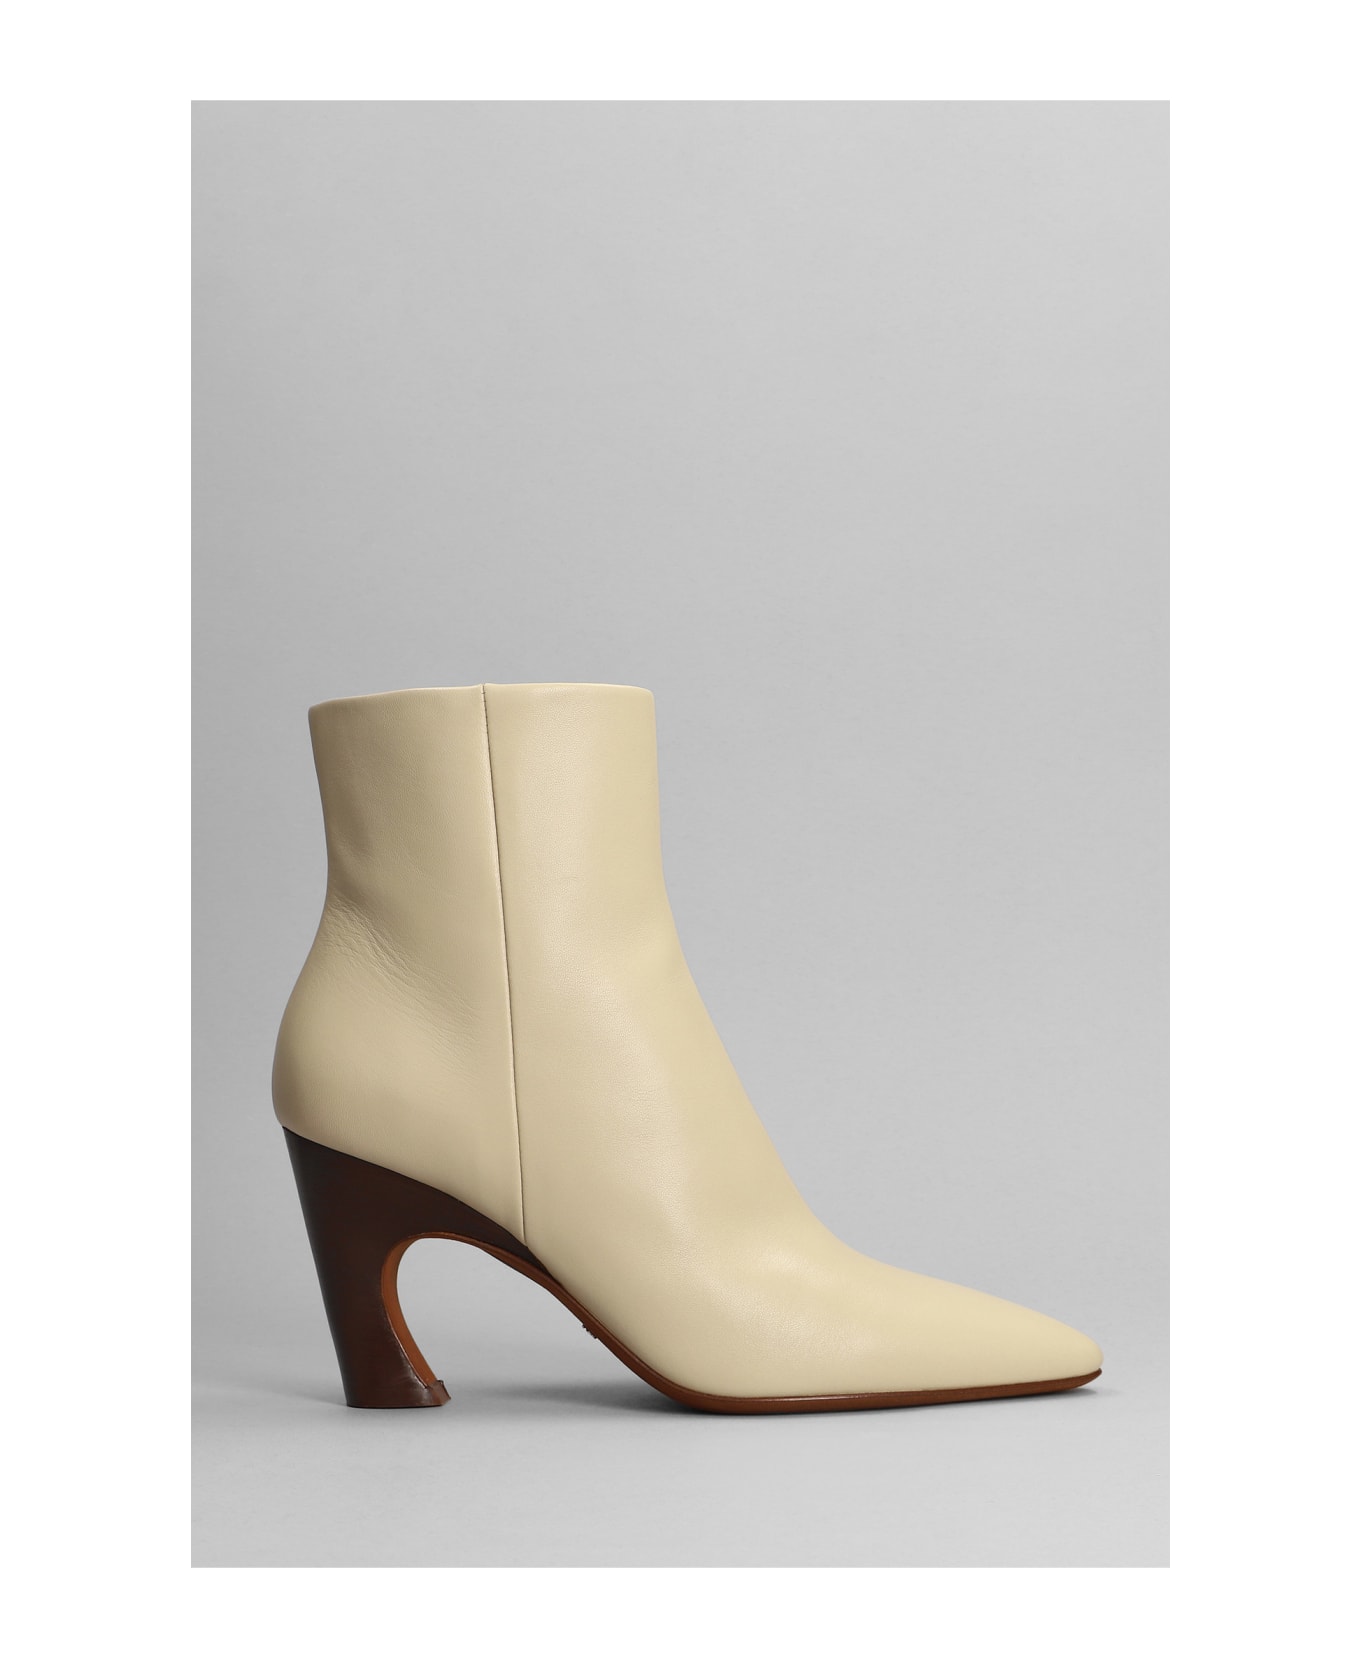 Chloé Oli High Heels Ankle Boots In Beige Leather - beige